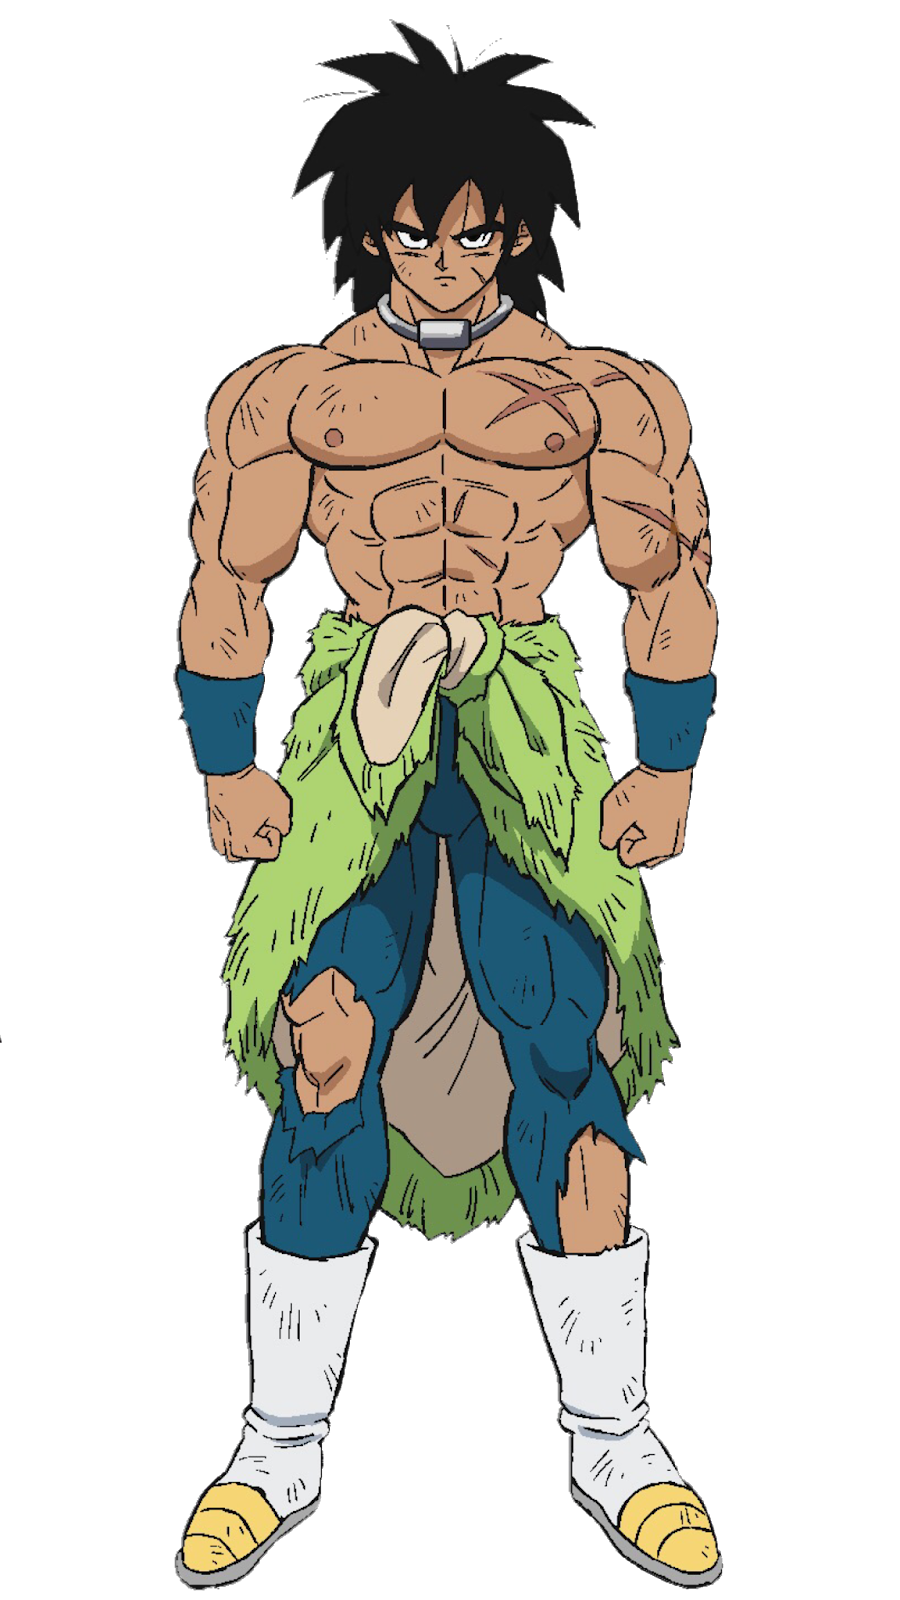 Renders Backgrounds LogoS: Broly Dragon ball Super